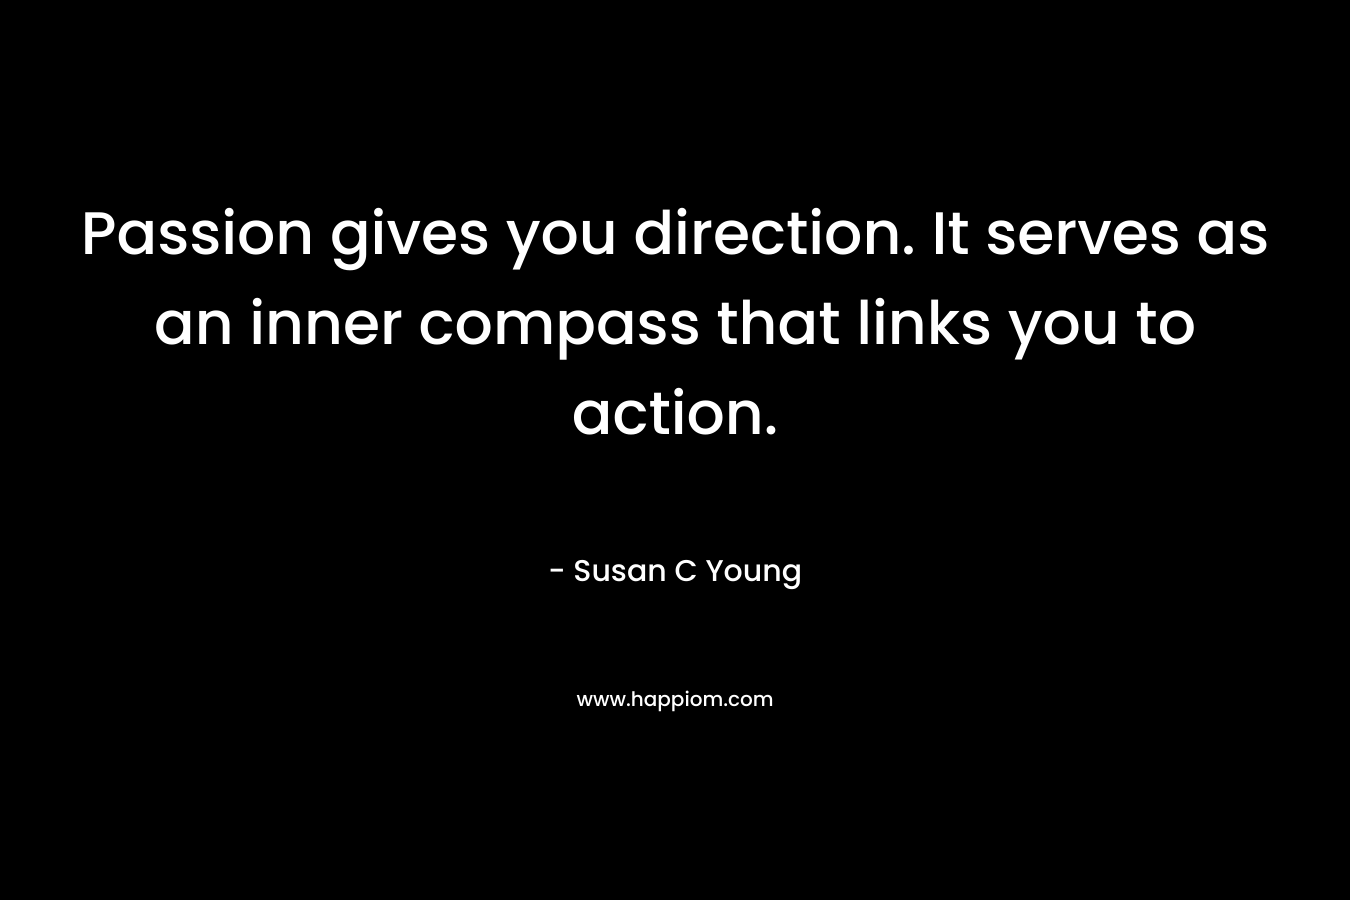 Passion gives you direction. It serves as an inner compass that links you to action. – Susan C Young